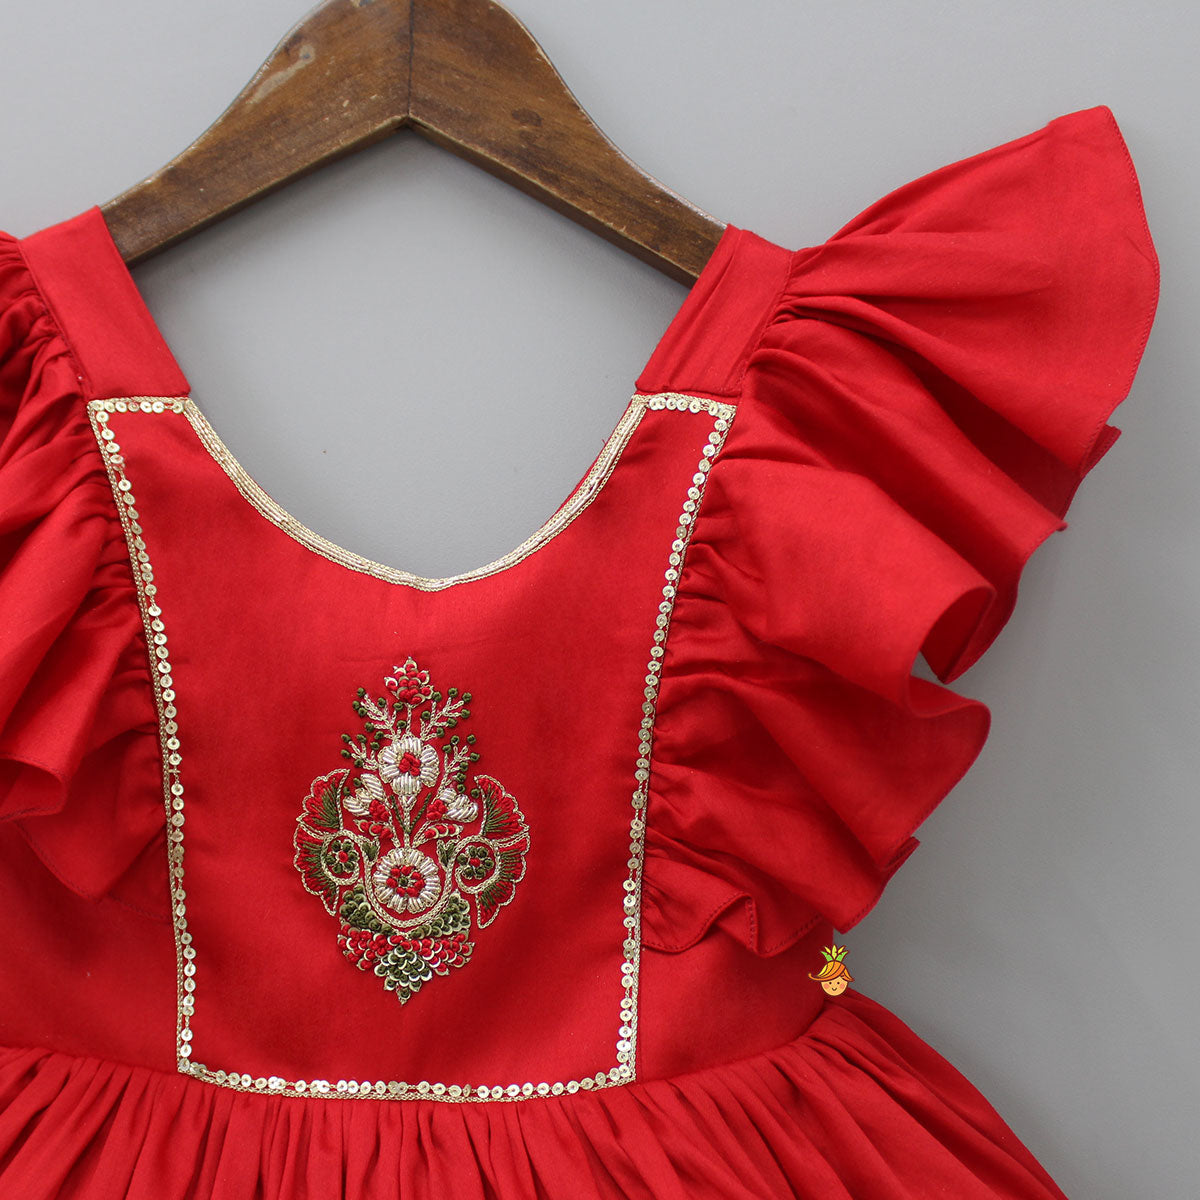 Red Hand Embroidered Frilly Dress